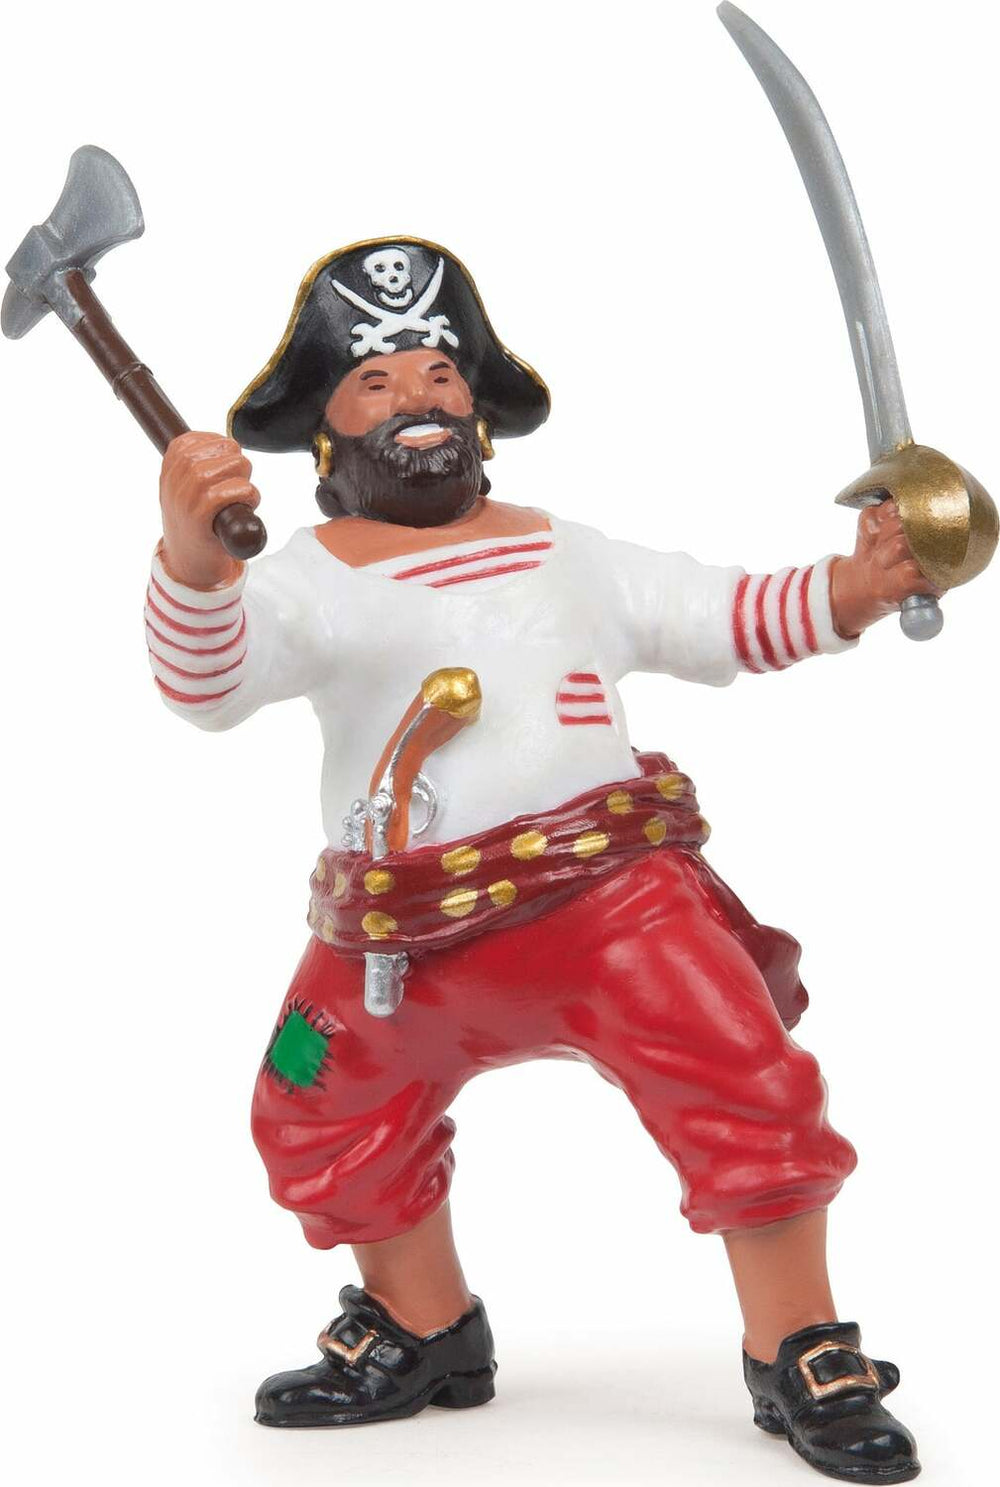 Papo France Pirate With Axe